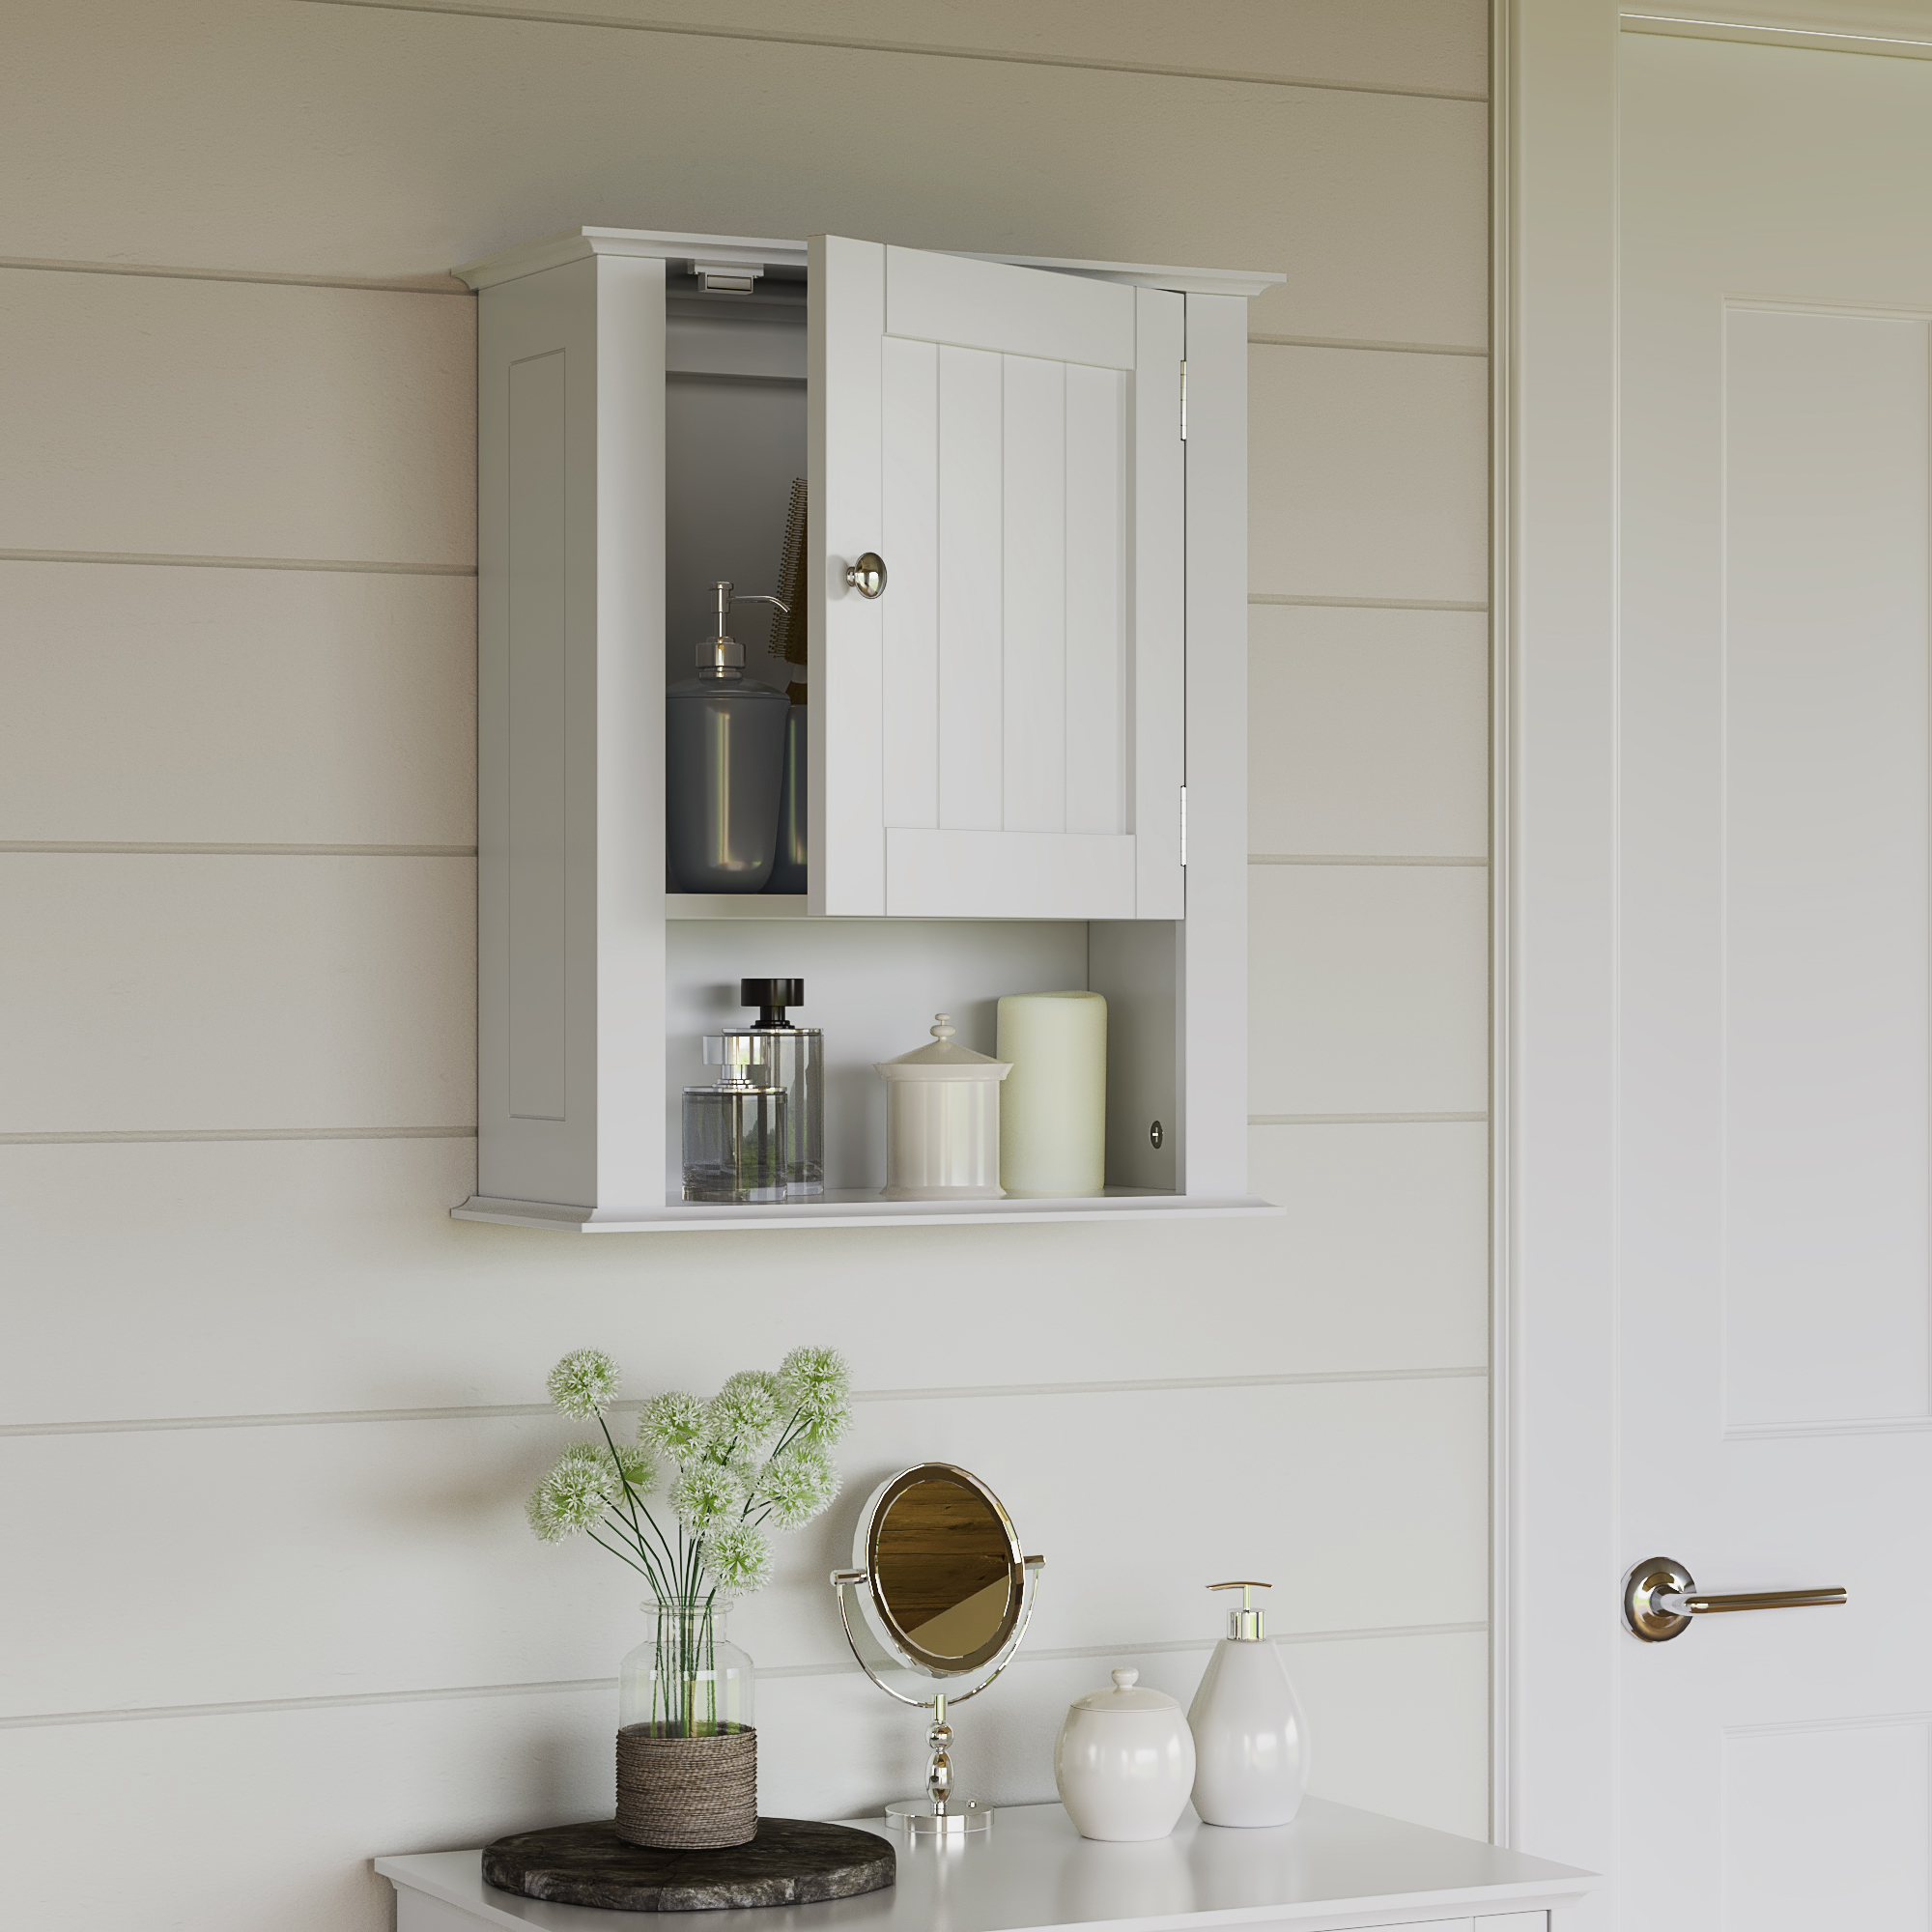 RiverRidge Home Ashland Collection Bath Single Door Wall Cabinet with Open Shelf, White - image 1 of 11